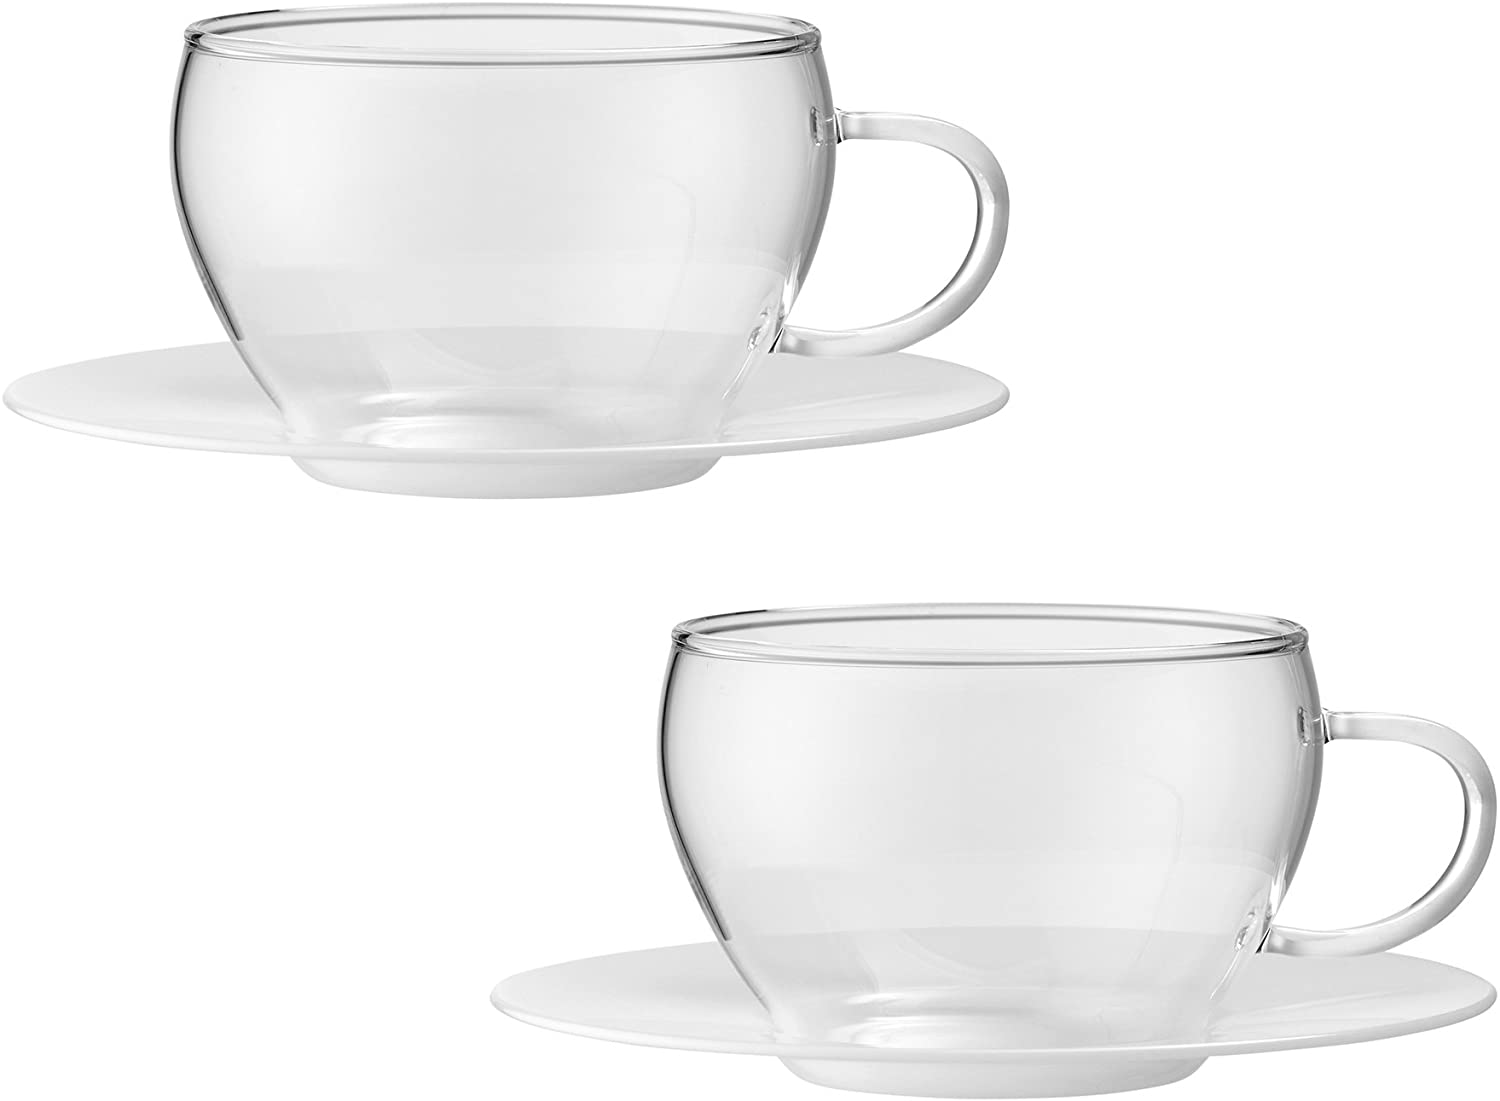 Bohemia Cristal 093 012 097 Play of colors set of 2 Plastic Saucer with Coffee/Cappuccino Cup Made of Borosilicate Glass Drinking Glass